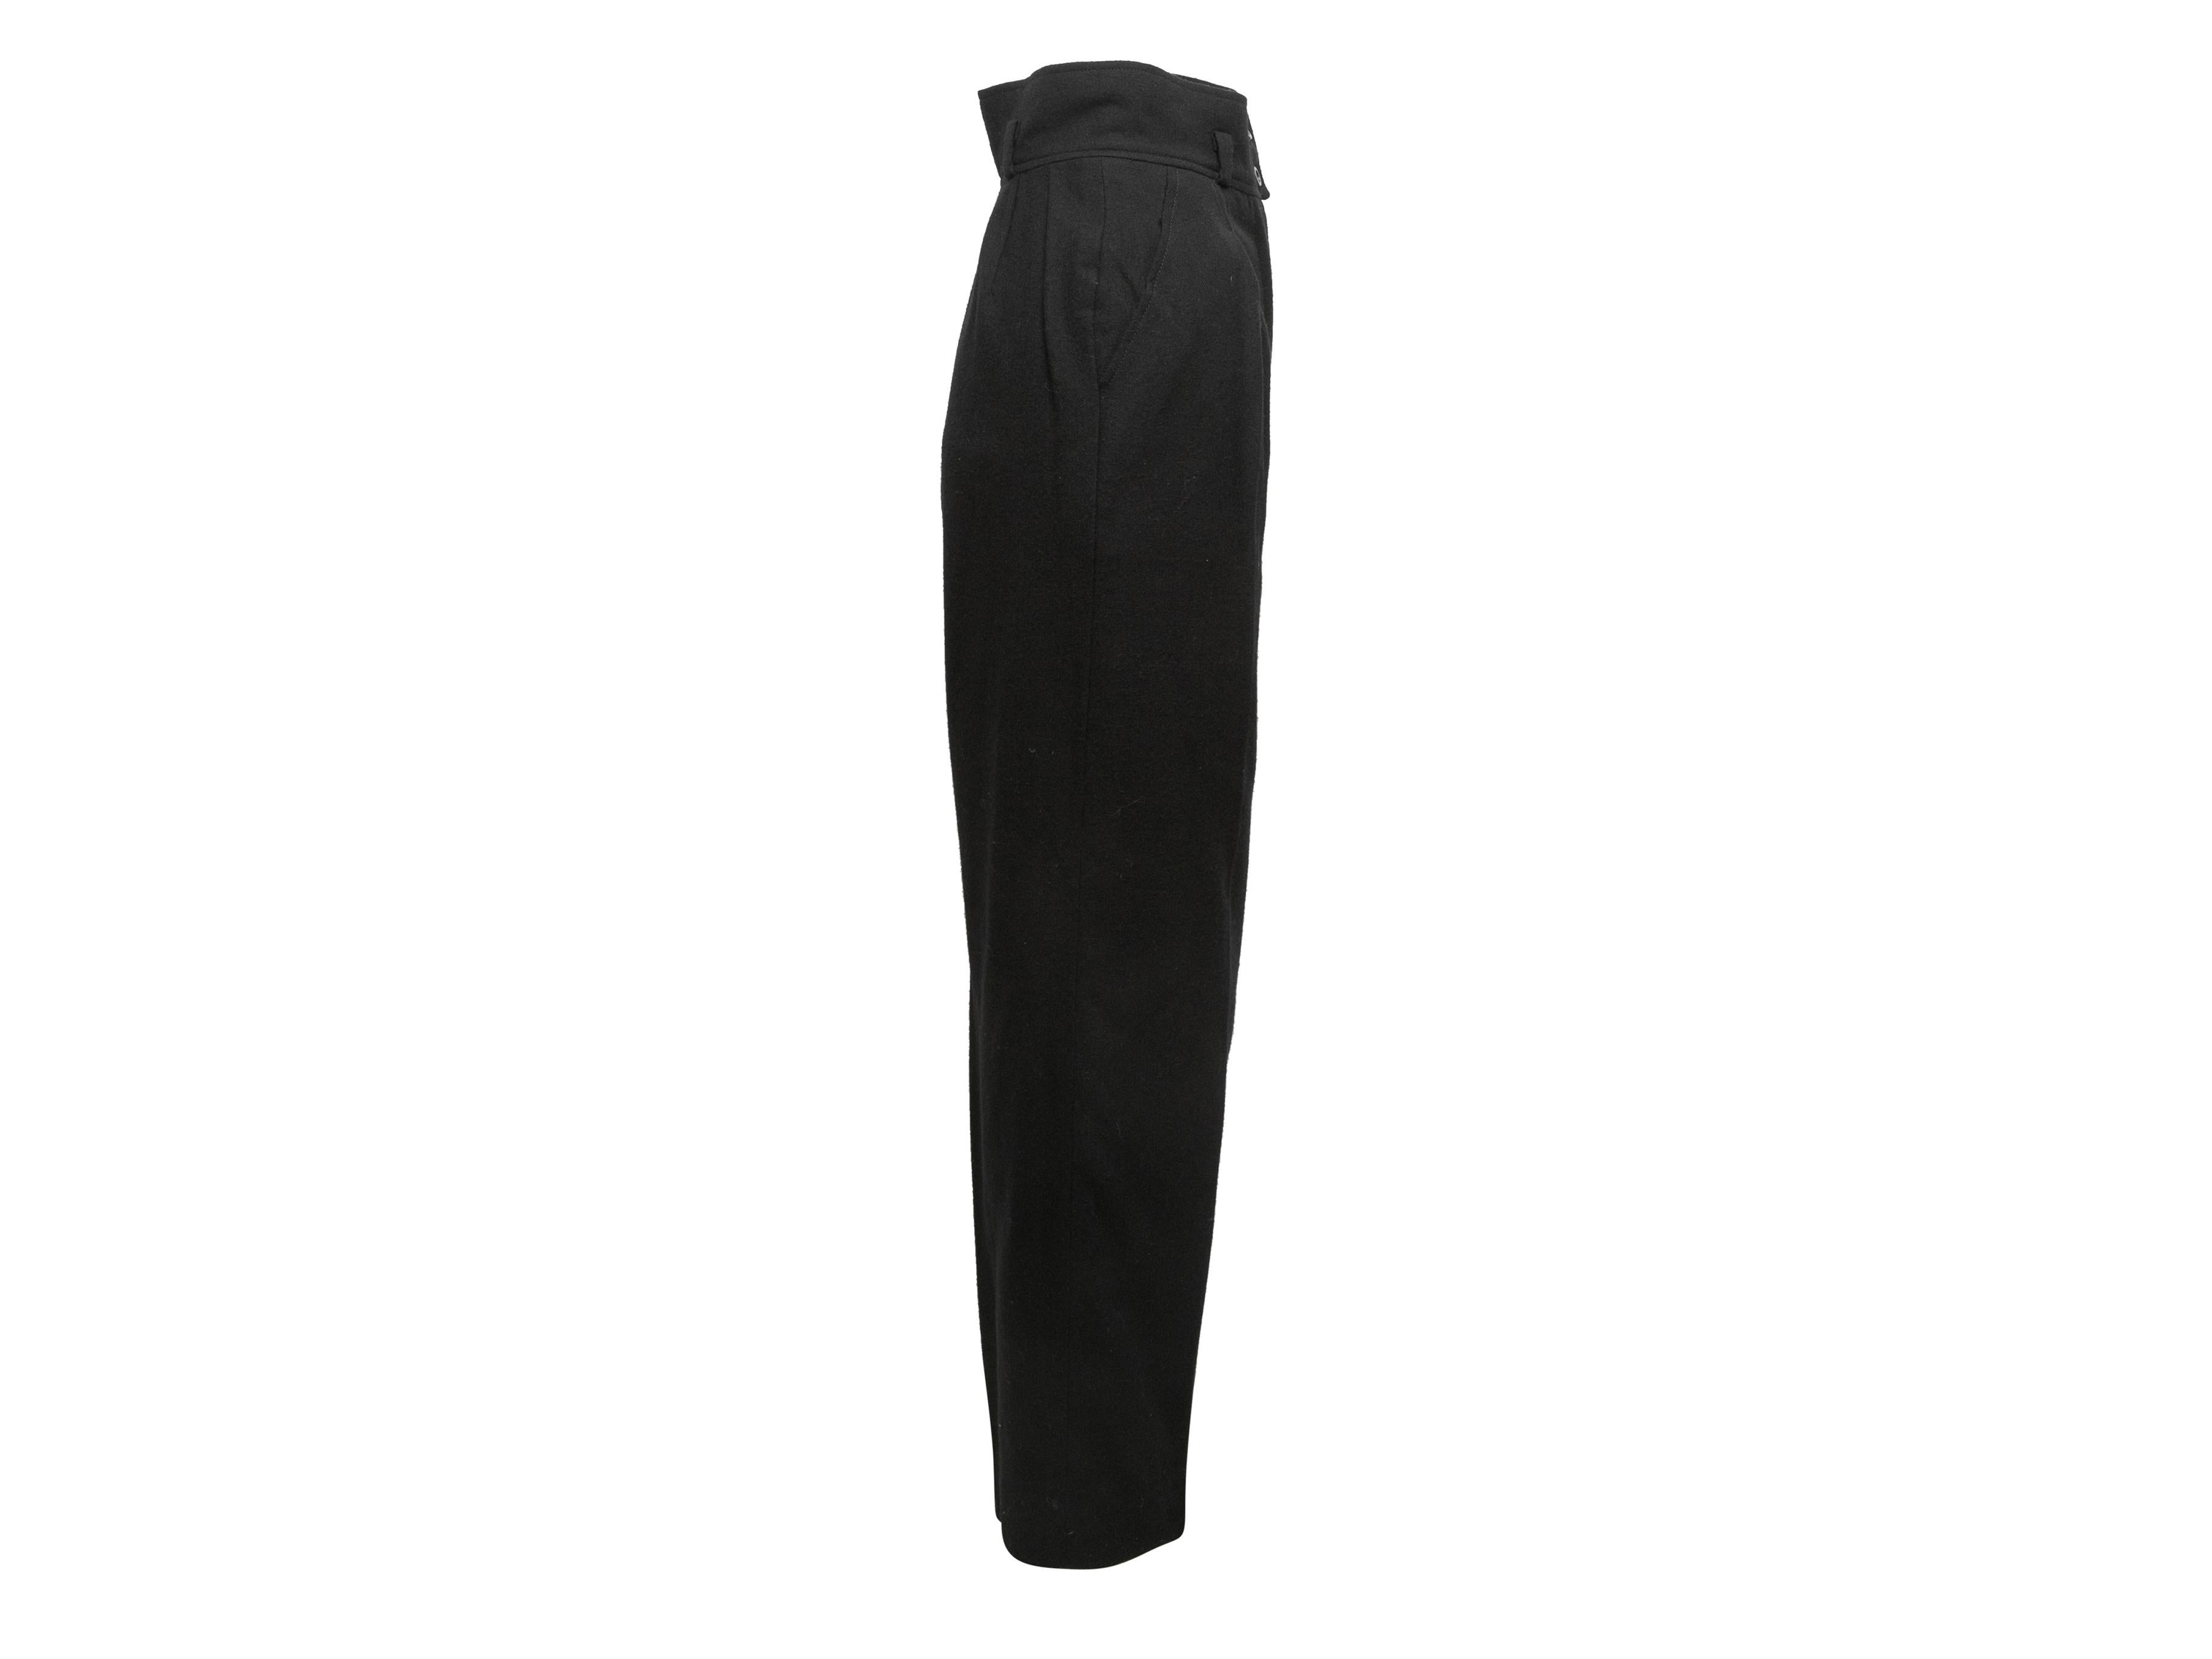 Vintage black wool straight-leg trousers by Chanel Boutique. Dual hip pockets. Zip closure at front. 23